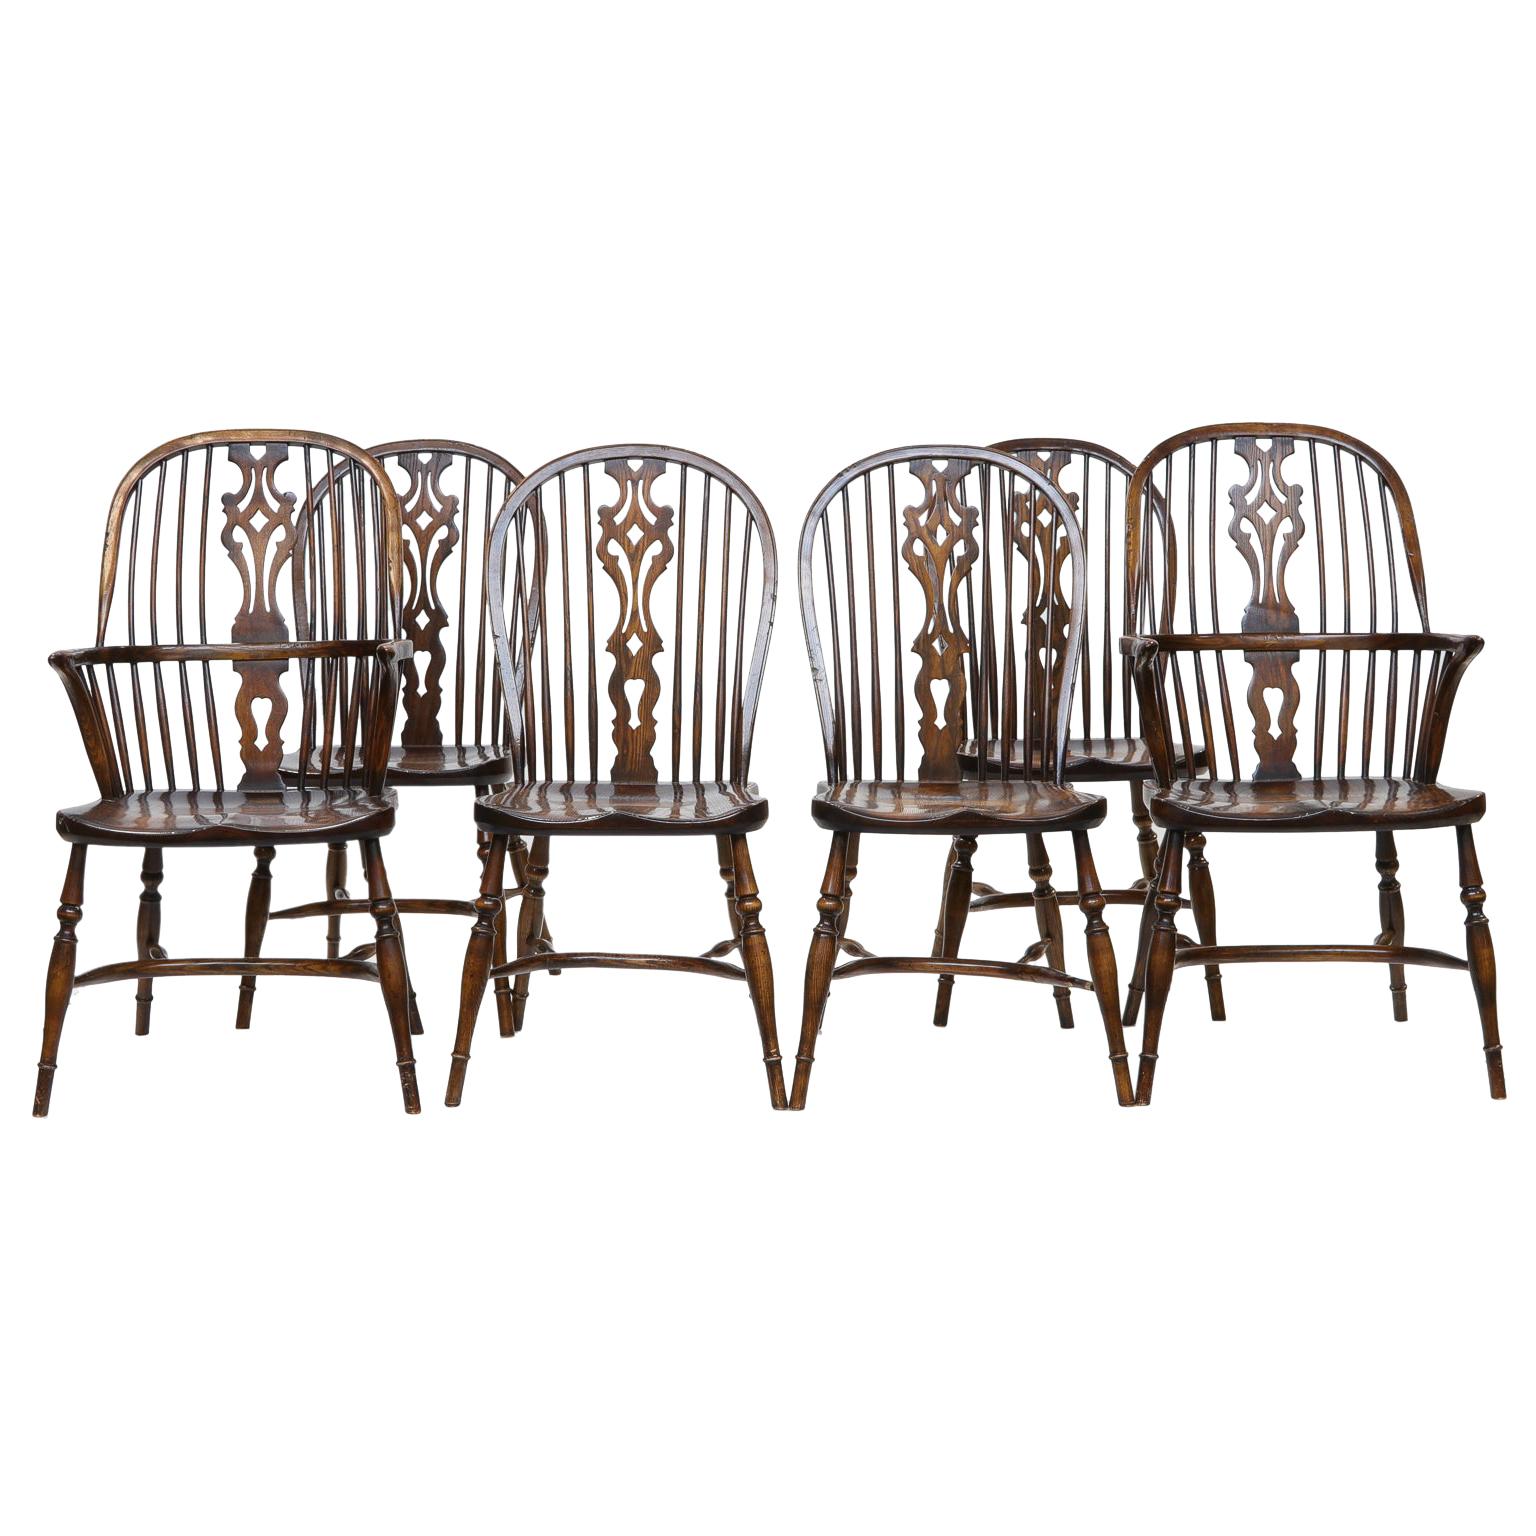 Set of 6 English Windsor Dining Chairs